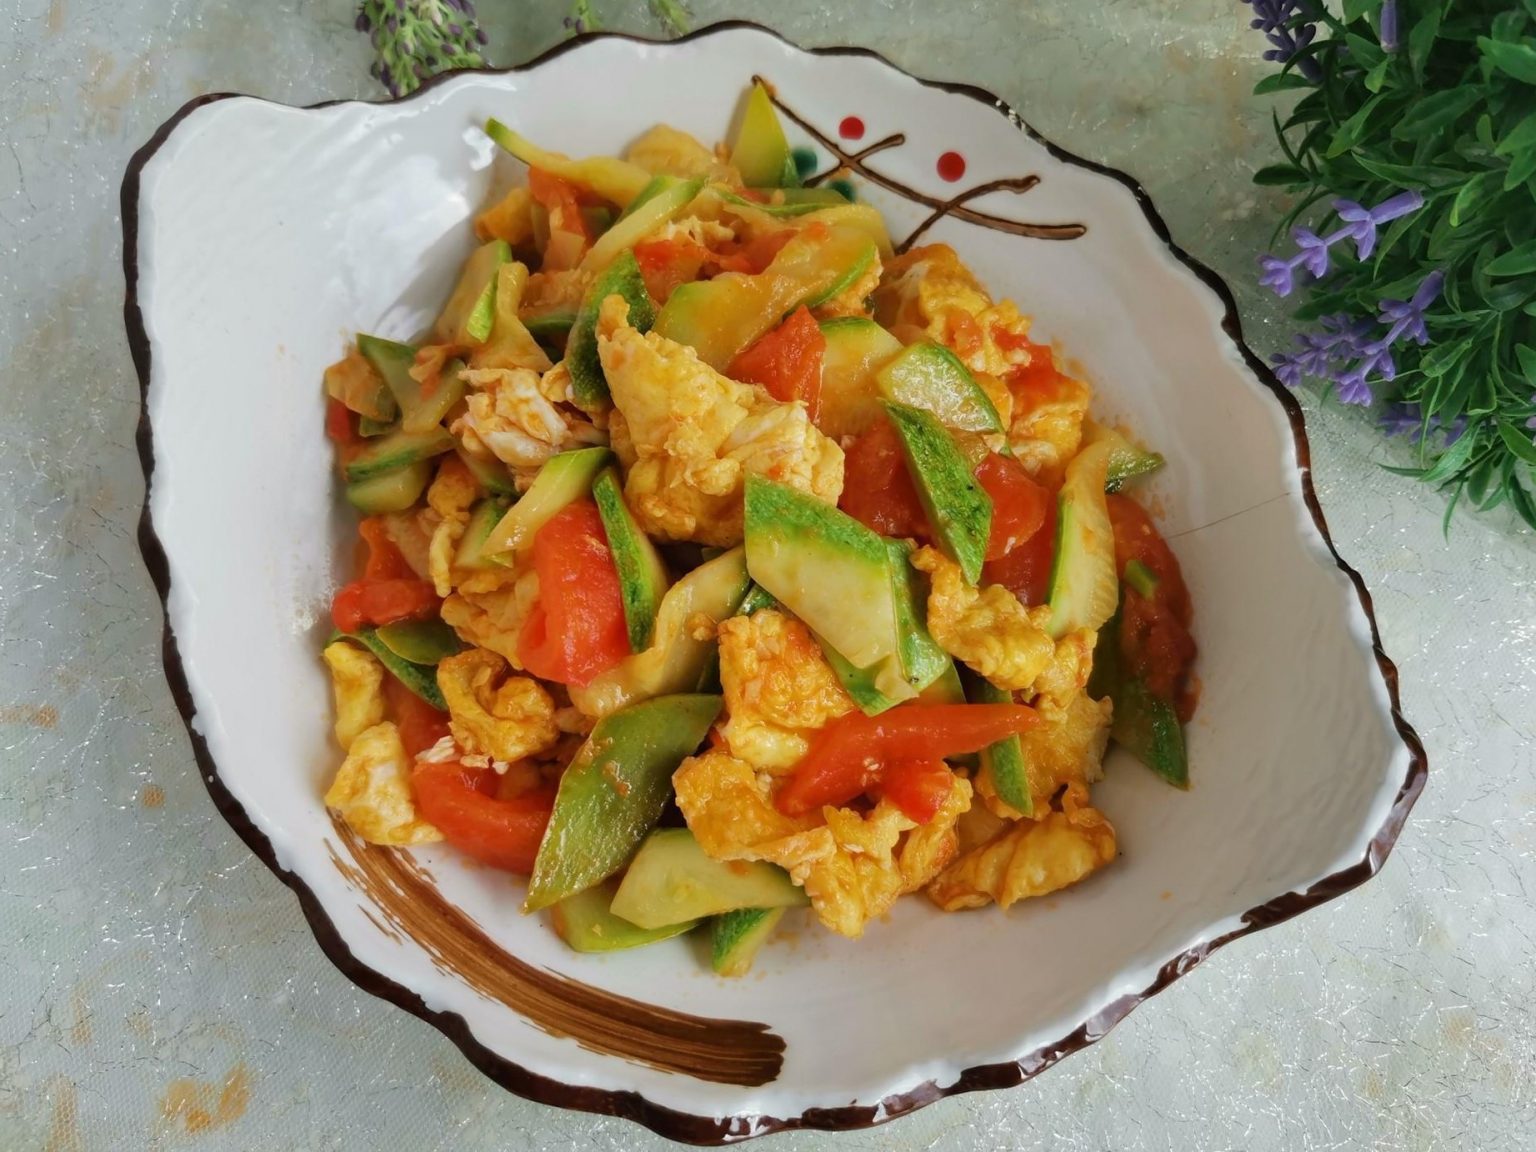 Zucchini and Tomato Stir-Fried With Egg Recipe - Easyfoodcook